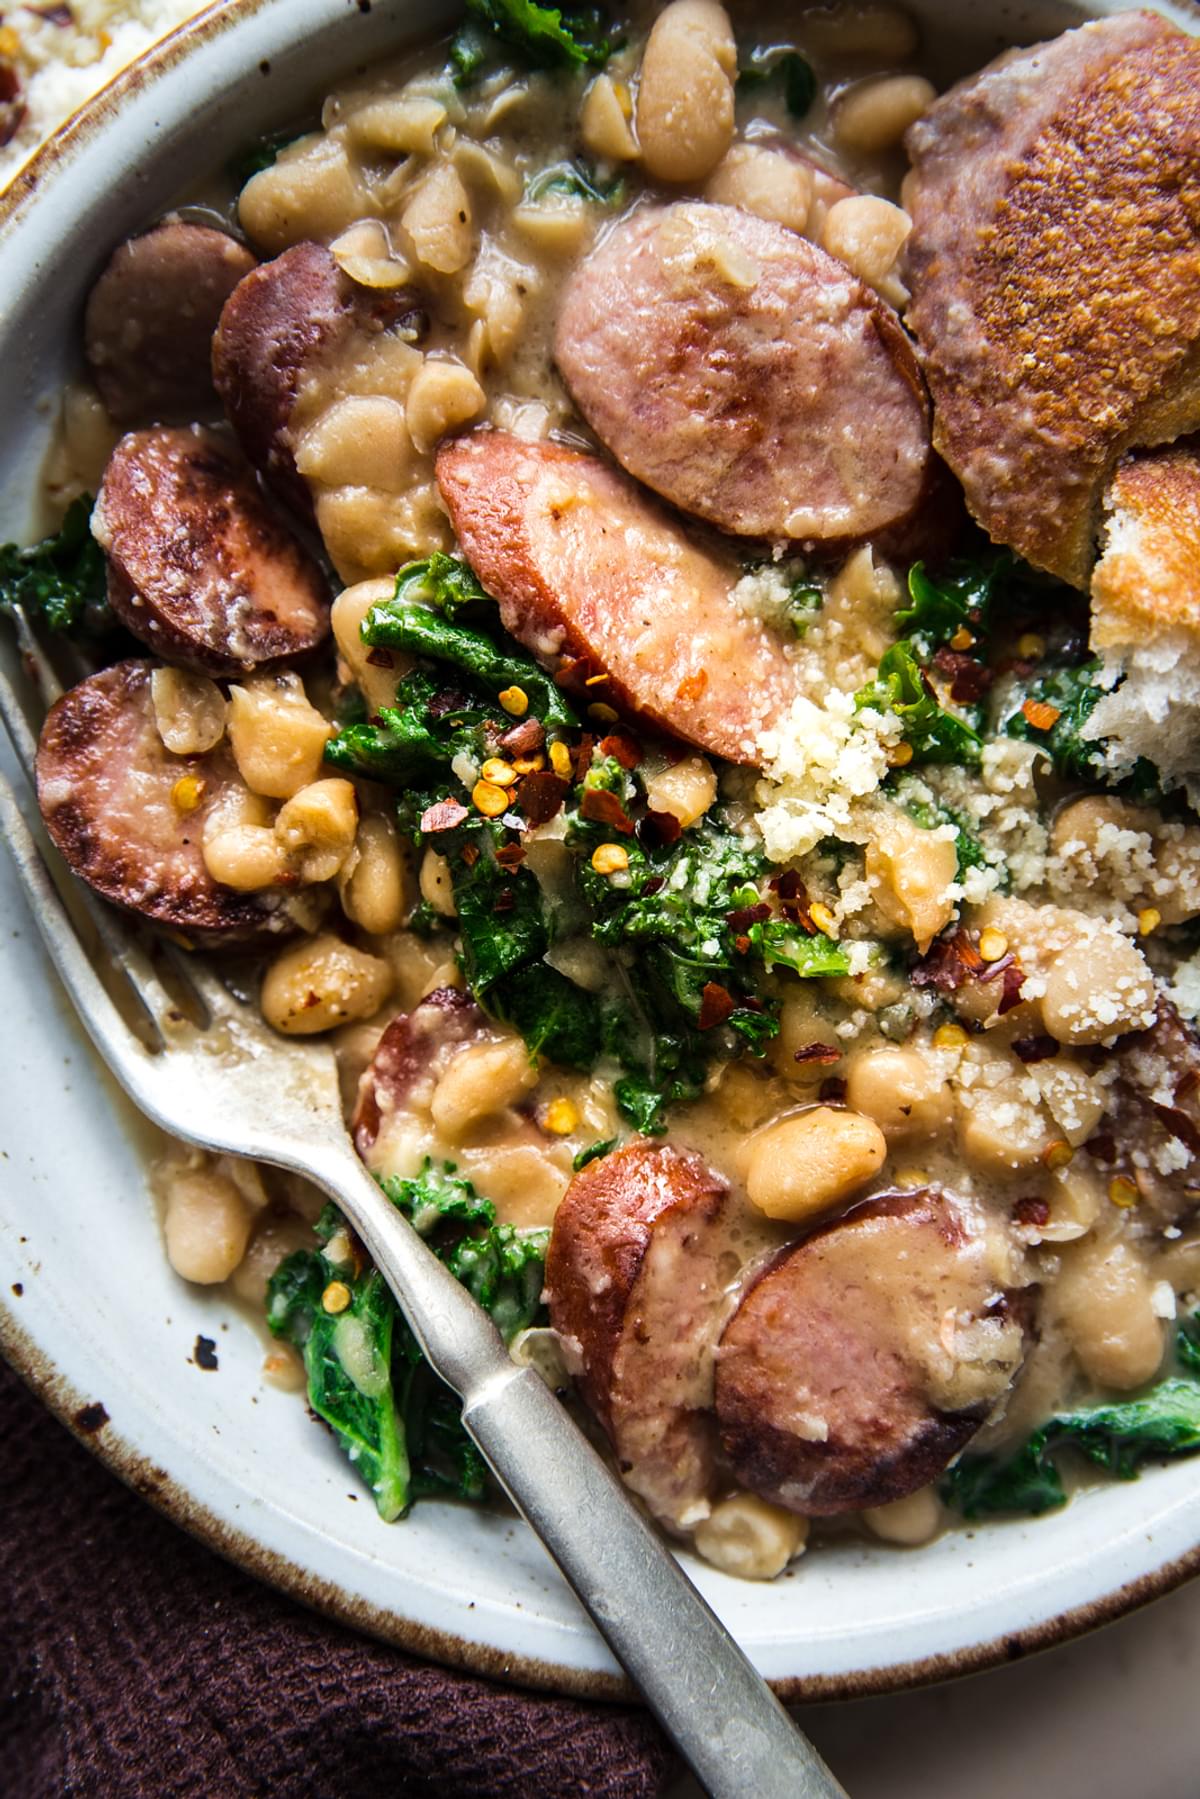 white bean and sausage skillet dinner with kale in a bowl with a fork and red pepper flakes.